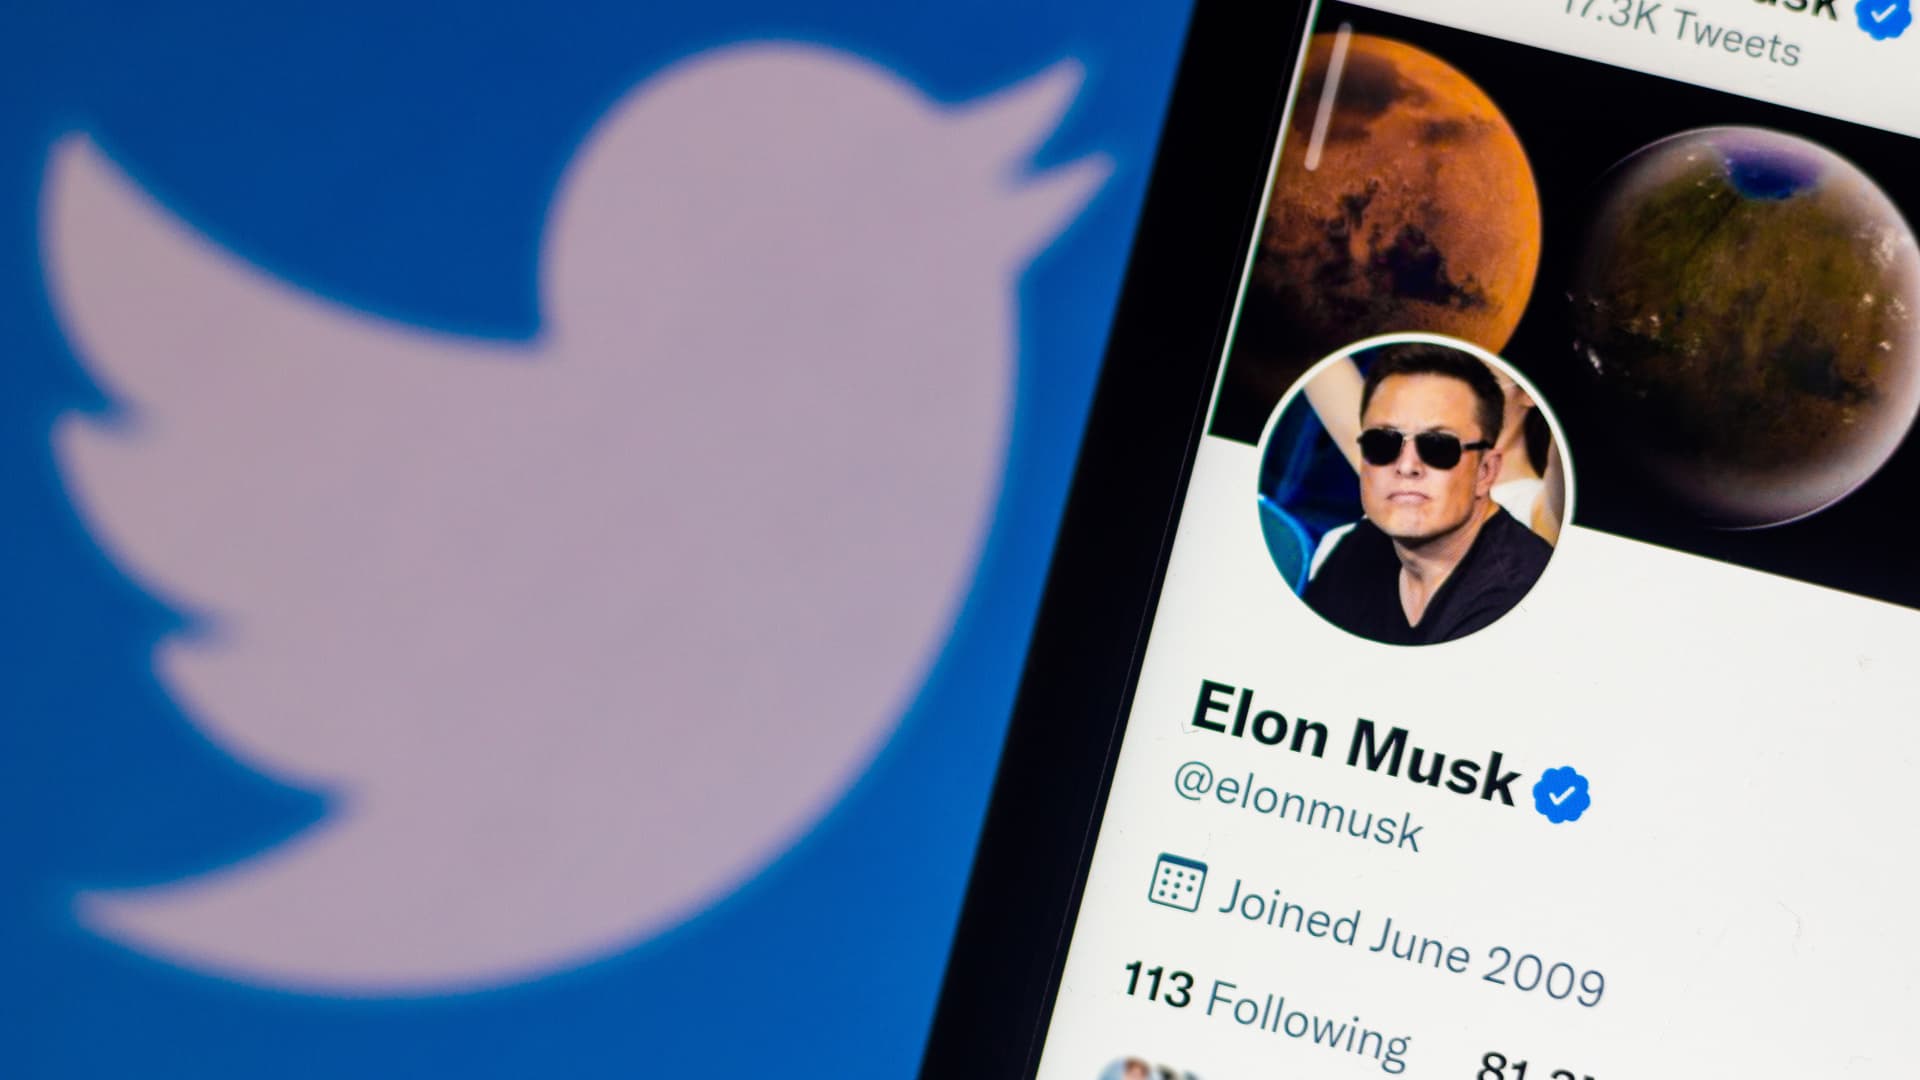 SEC letter to Musk questions tweet about Twitter acquisition